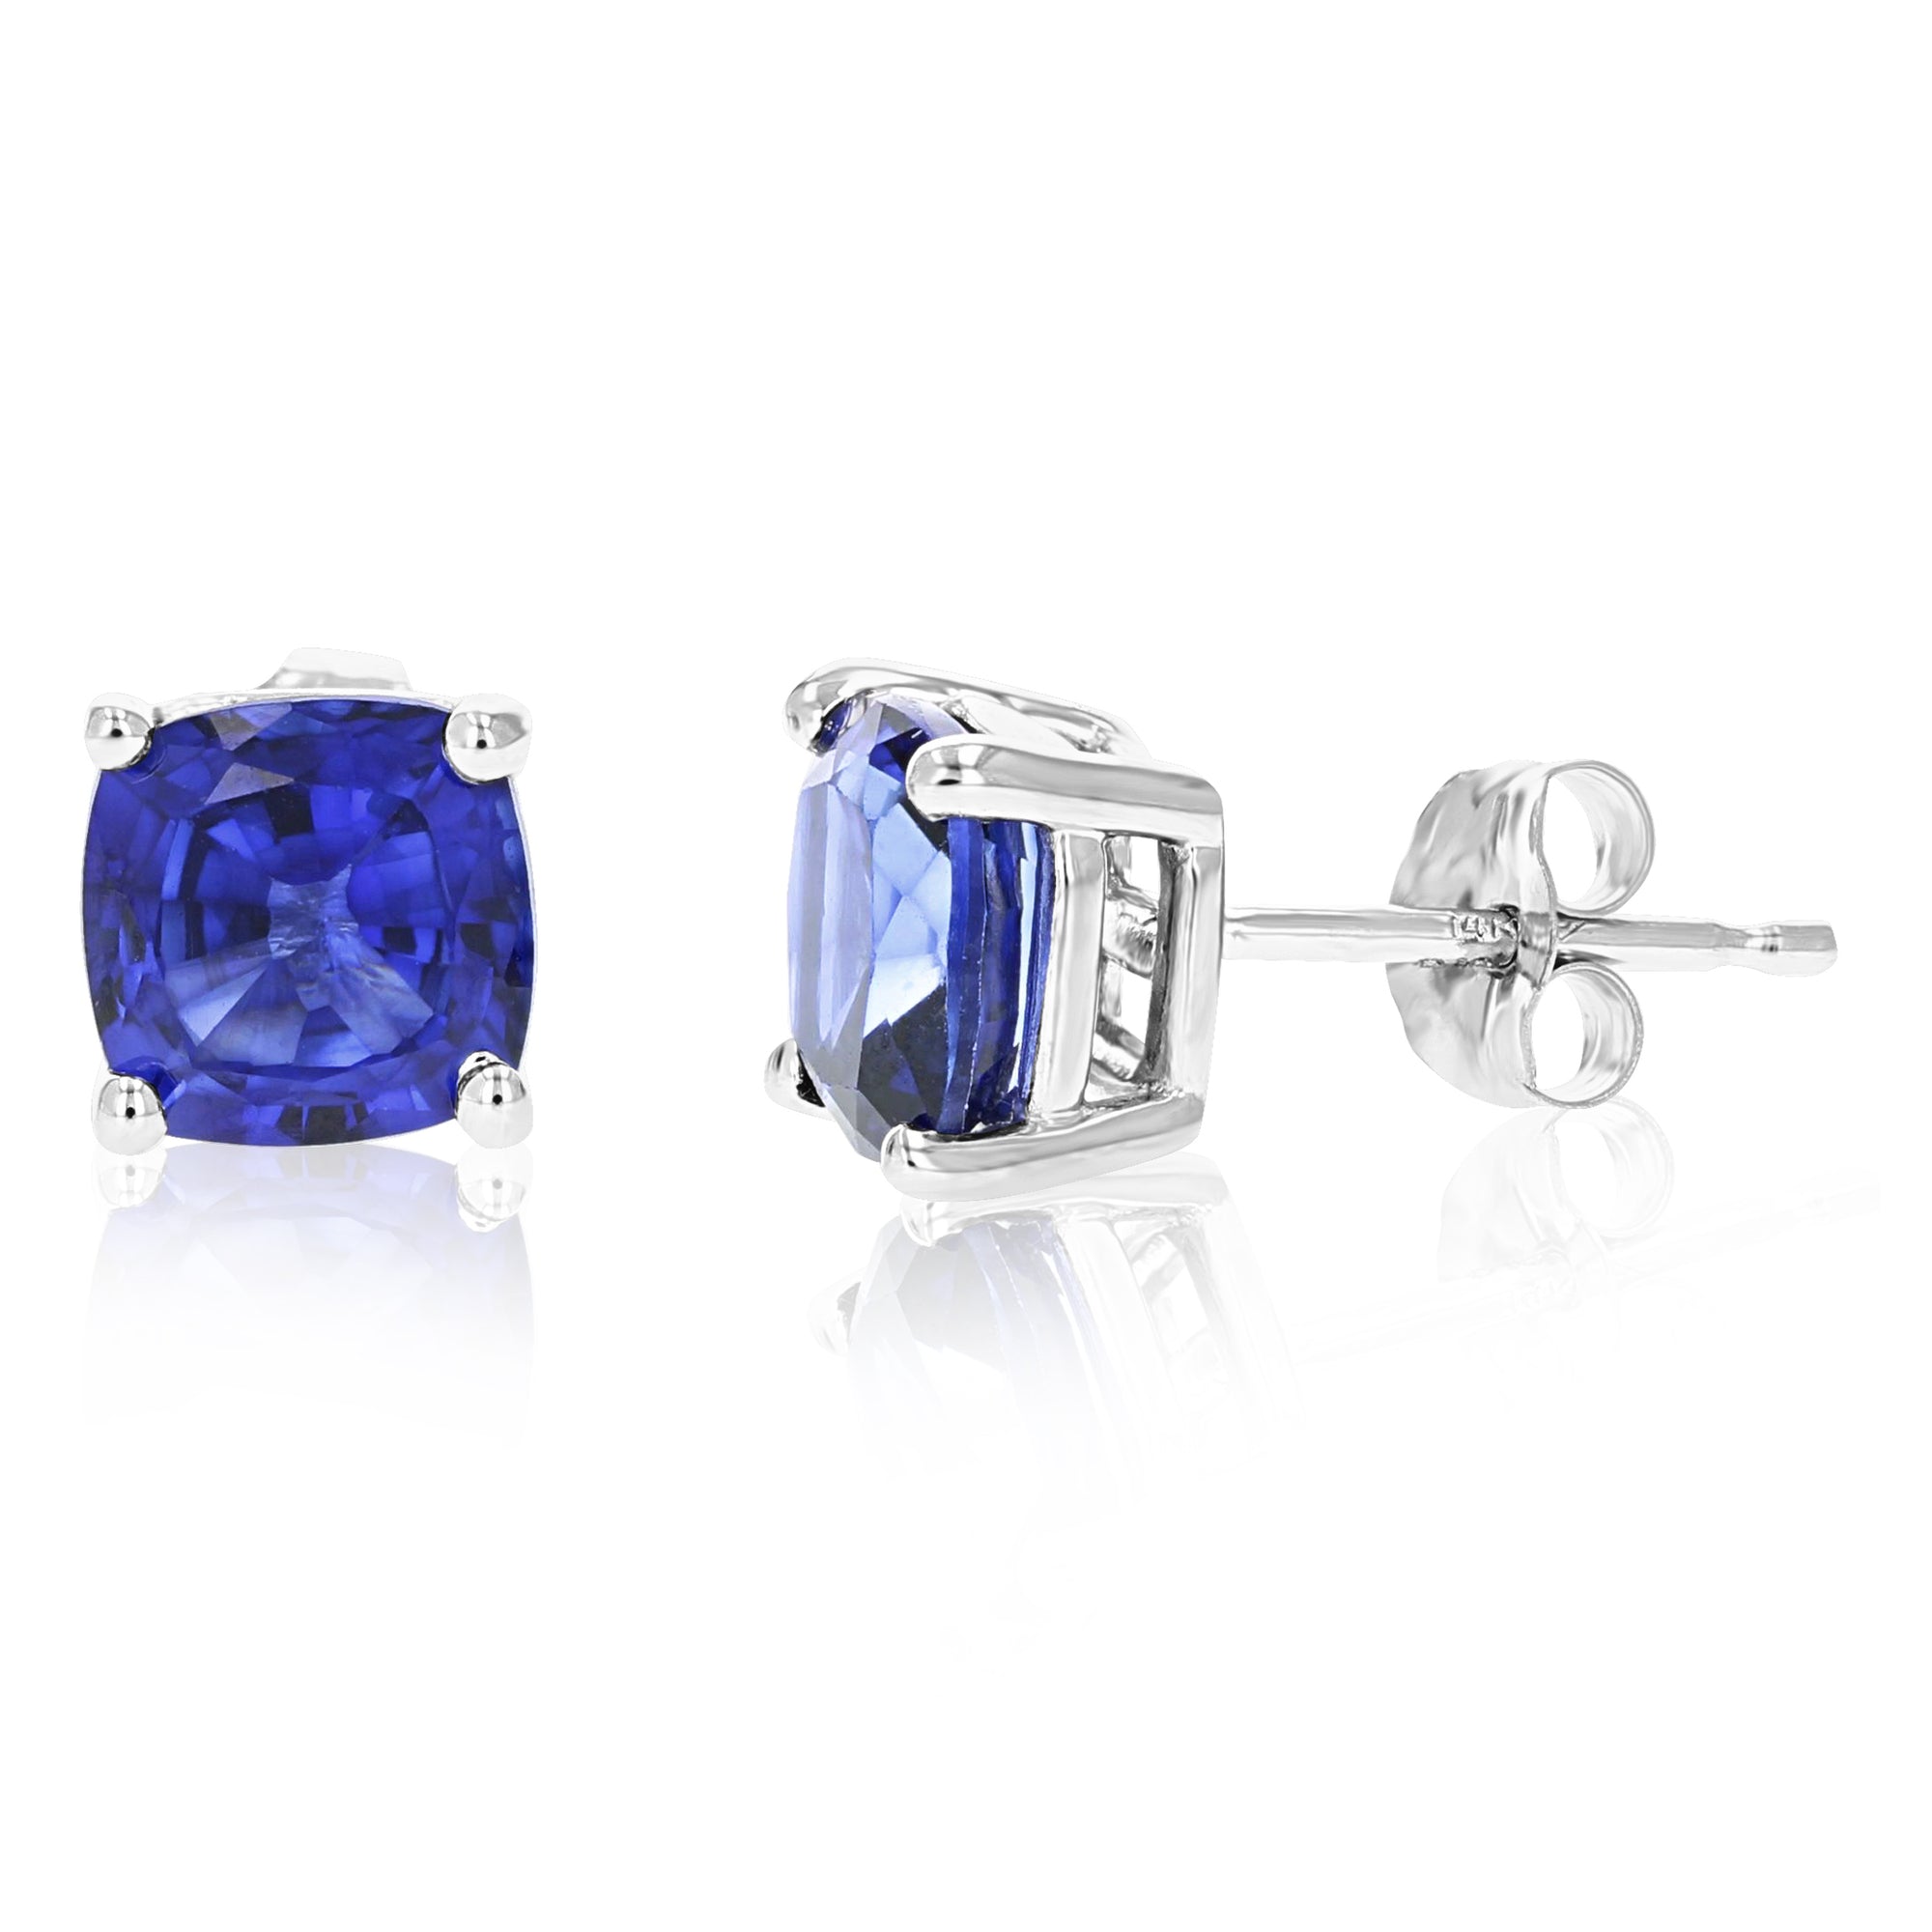 1.80 cttw 6 MM Created Blue Sapphire Stud Earrings 14K White Gold Cushion Cut with Push Backs September Birthstone